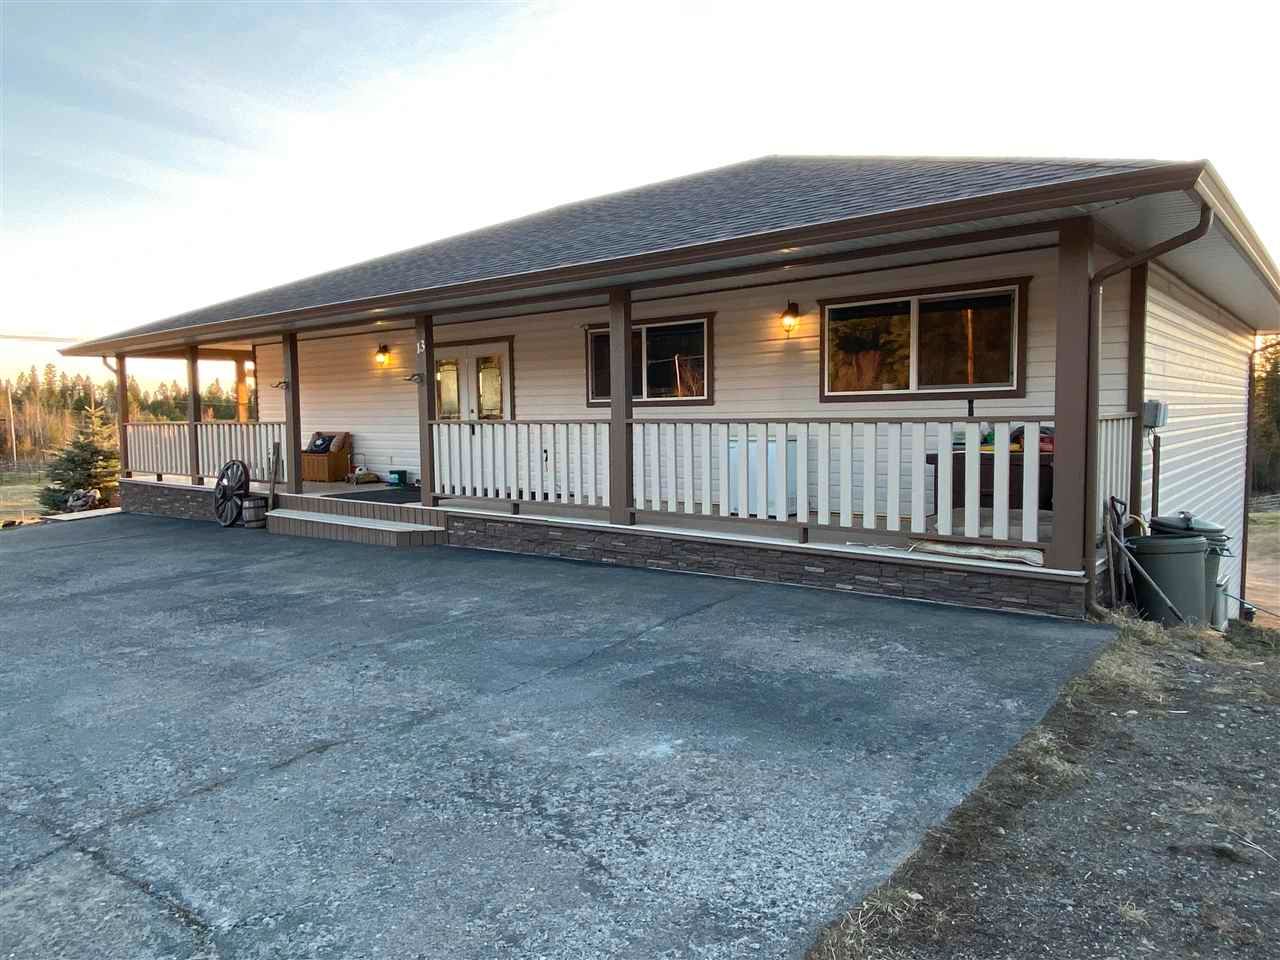 New property listed in 150 Mile House, Williams Lake (Zone 27)